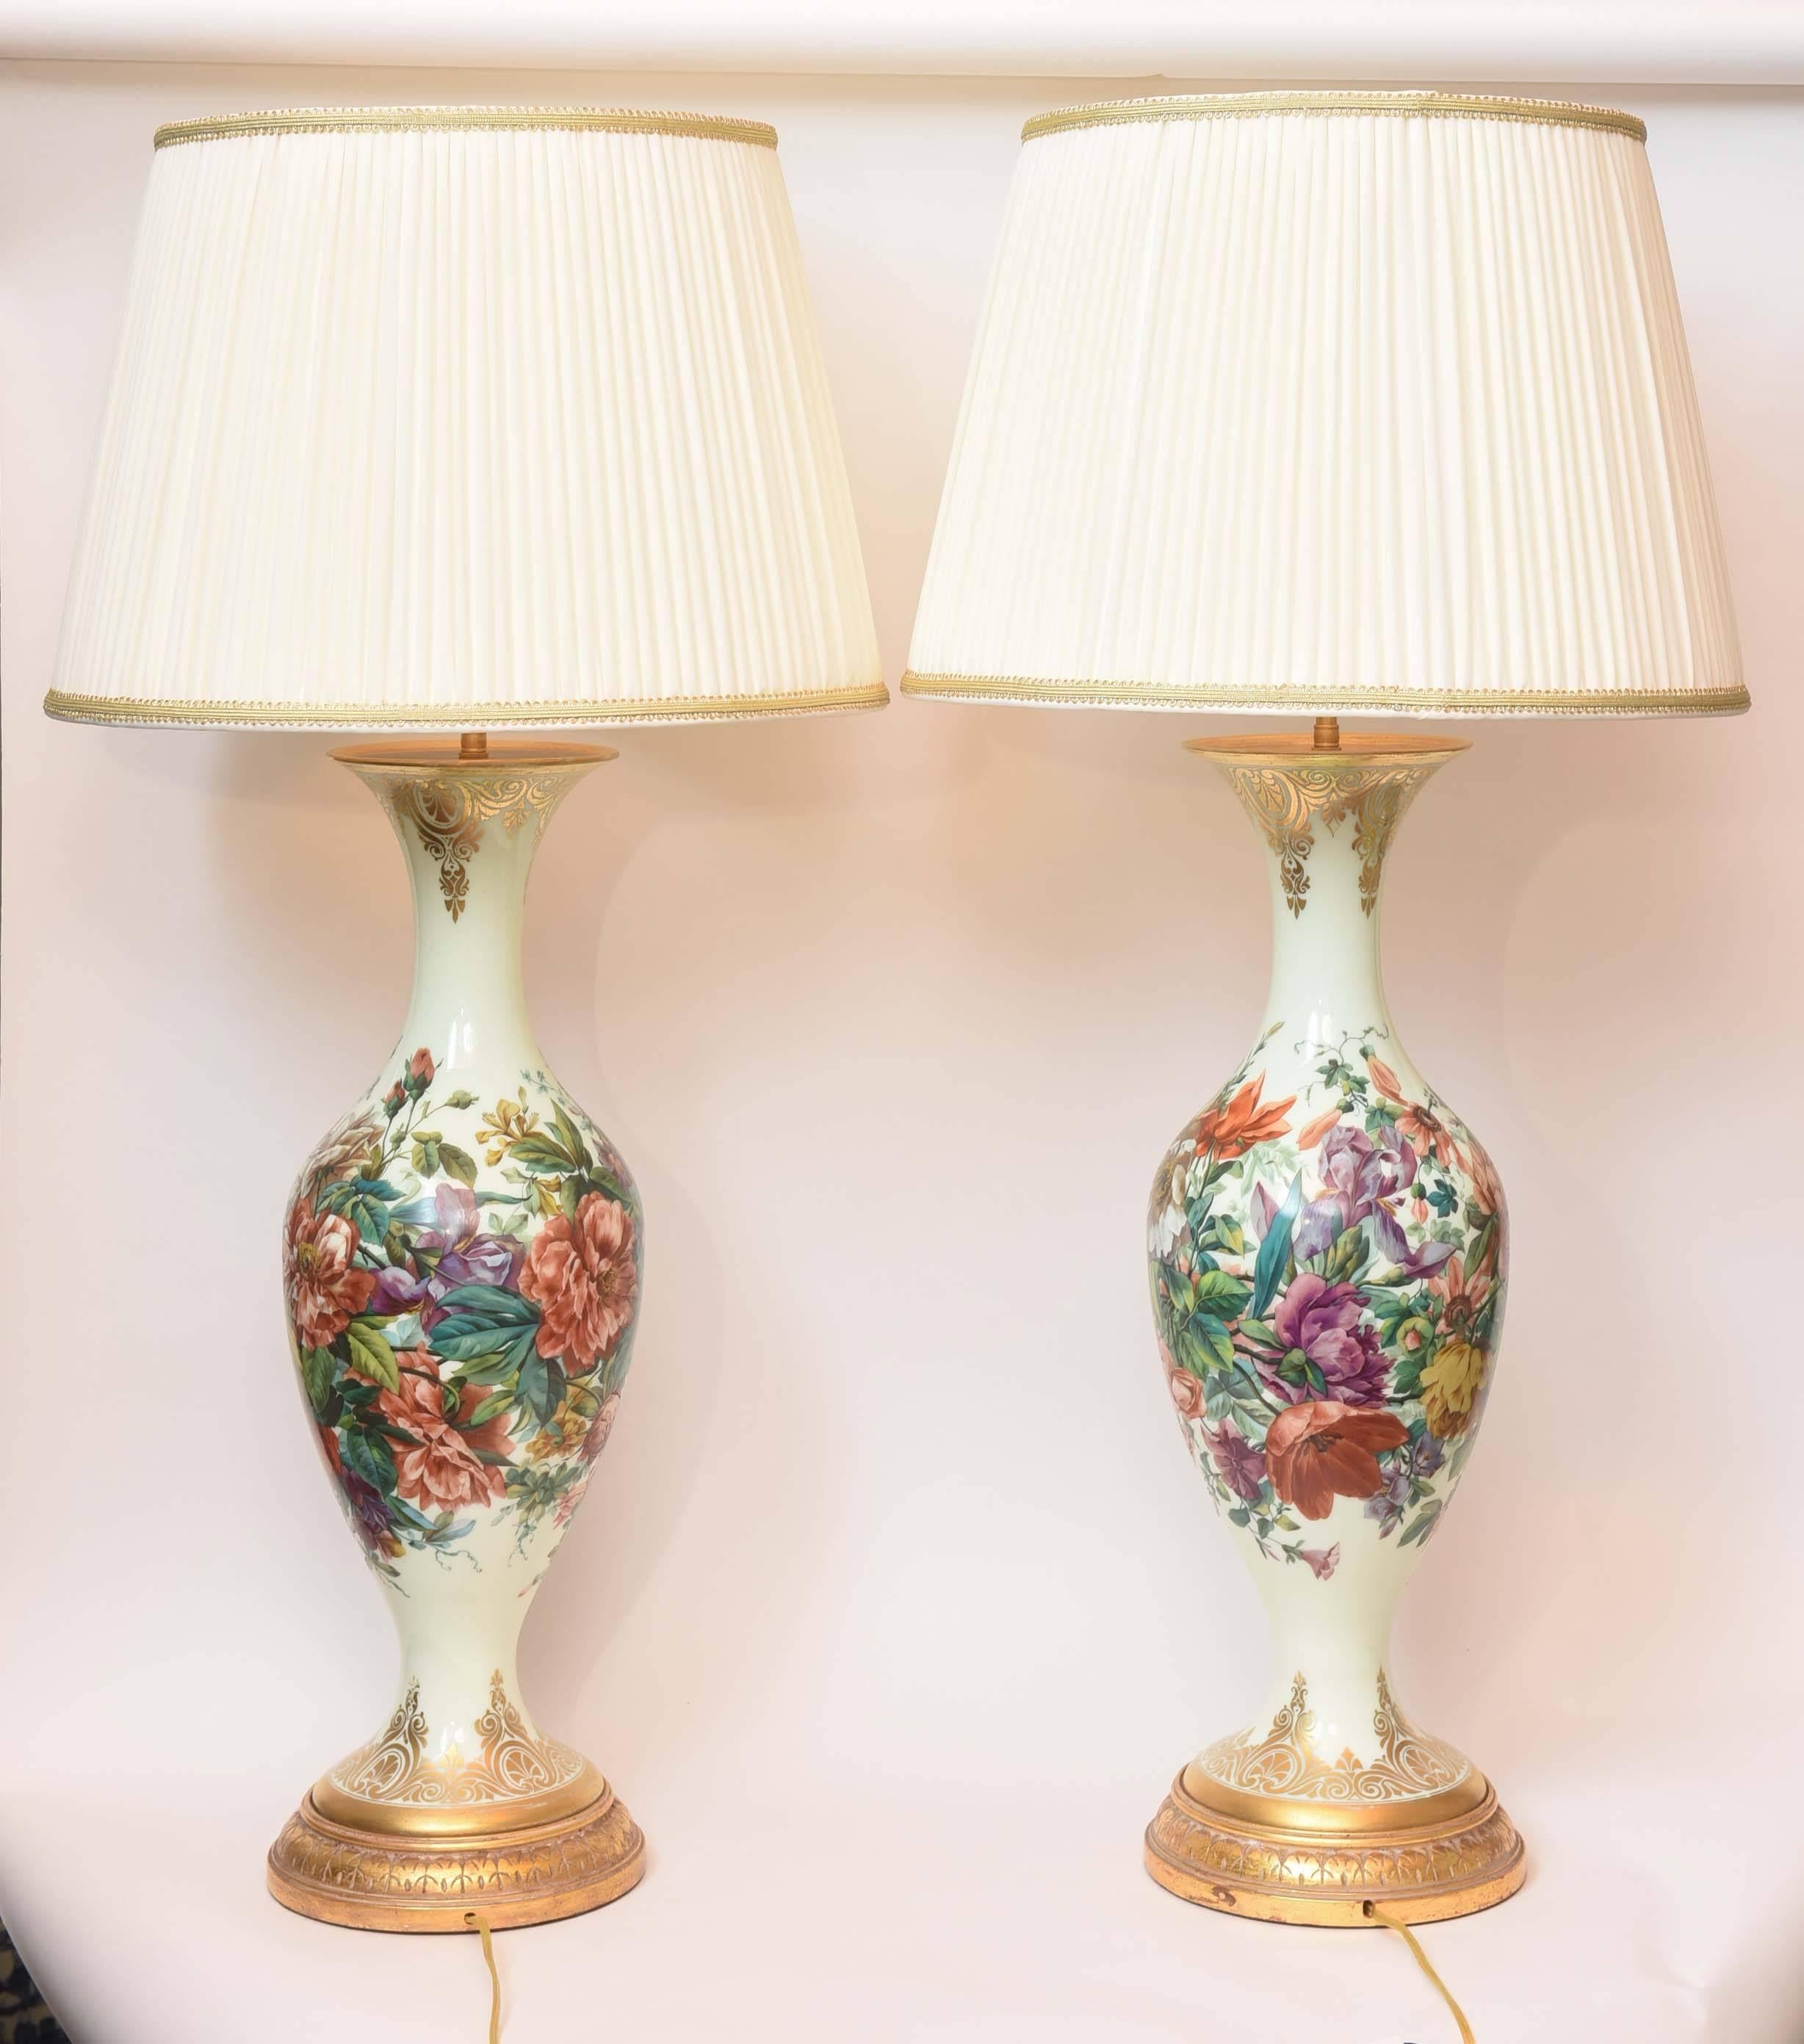 Massive Pair of 19th Century French Opaline Glass Lamps For Sale 6